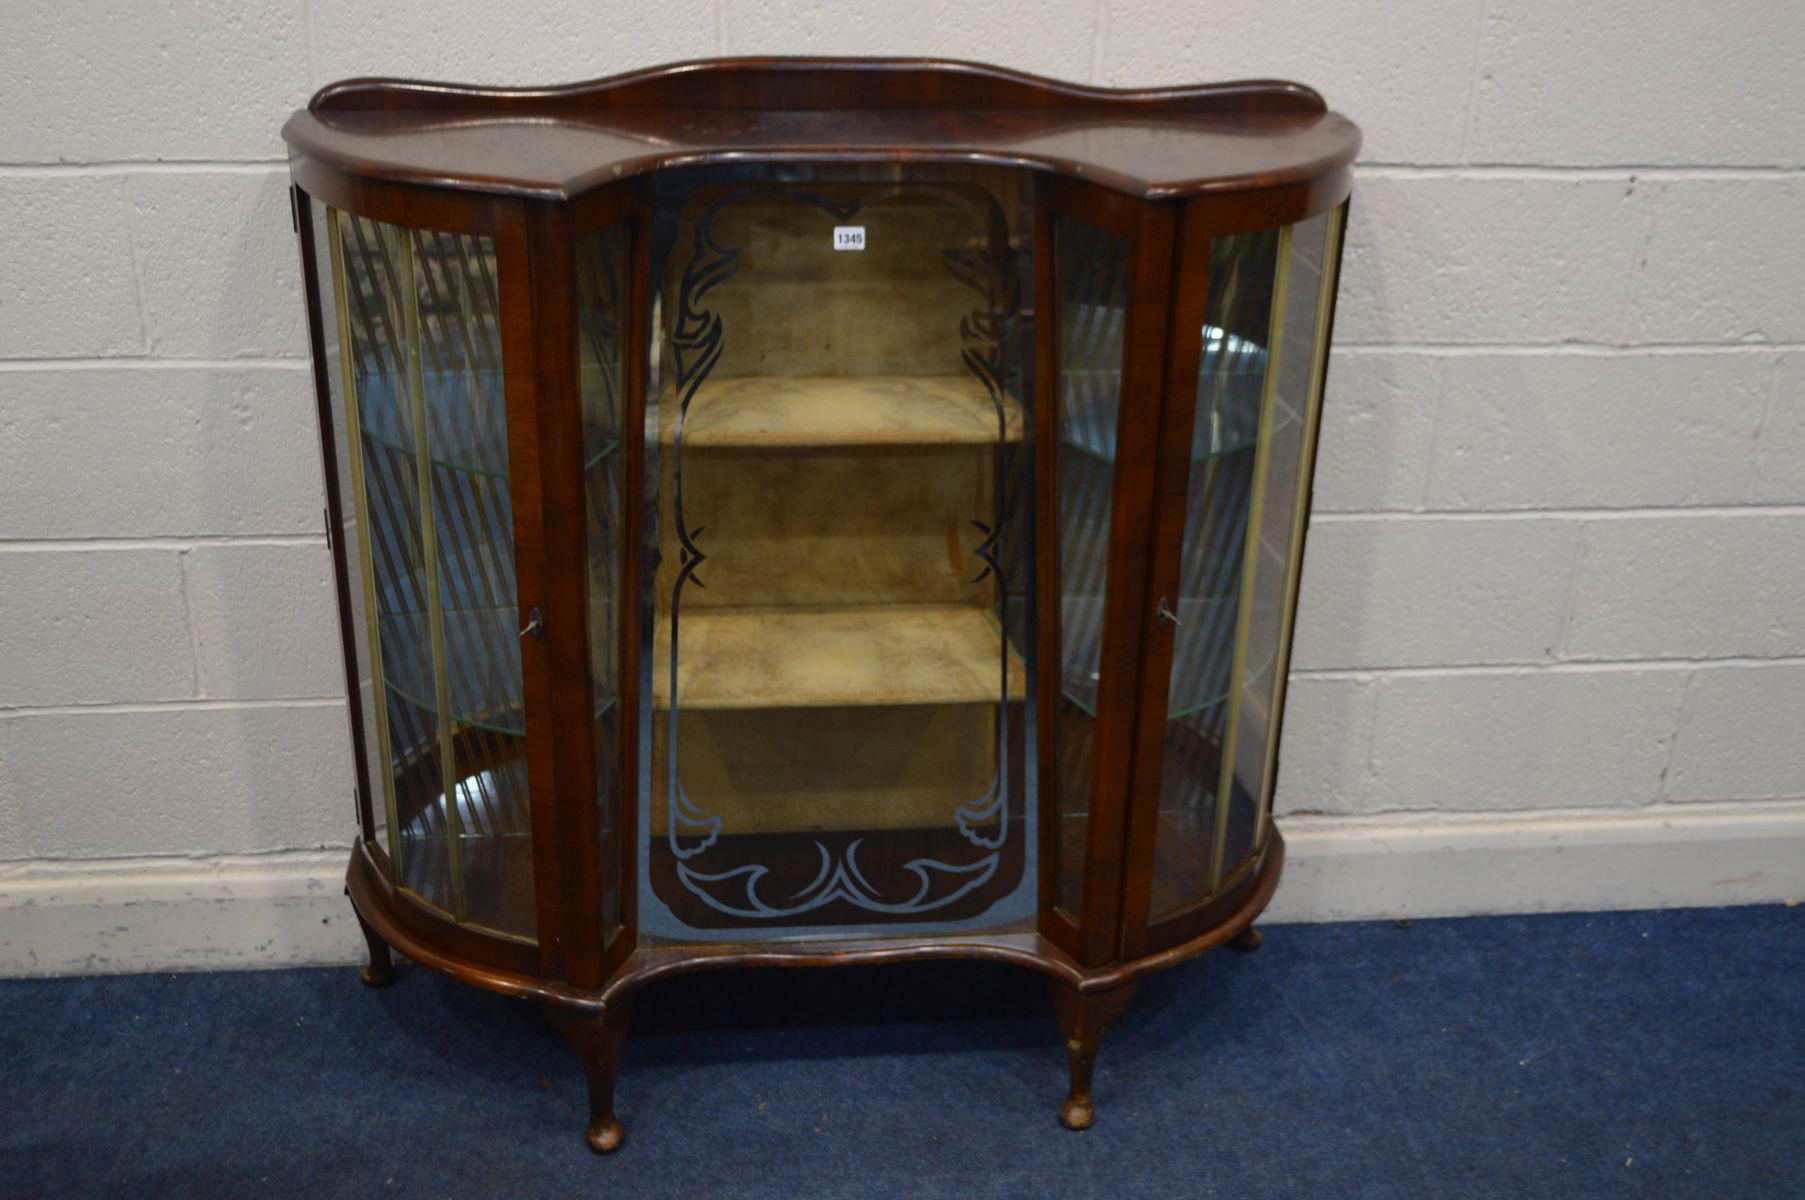 A 1940'S MAHOGANY CHINA CABINET, with a central glass front with two shelves, flanked by single